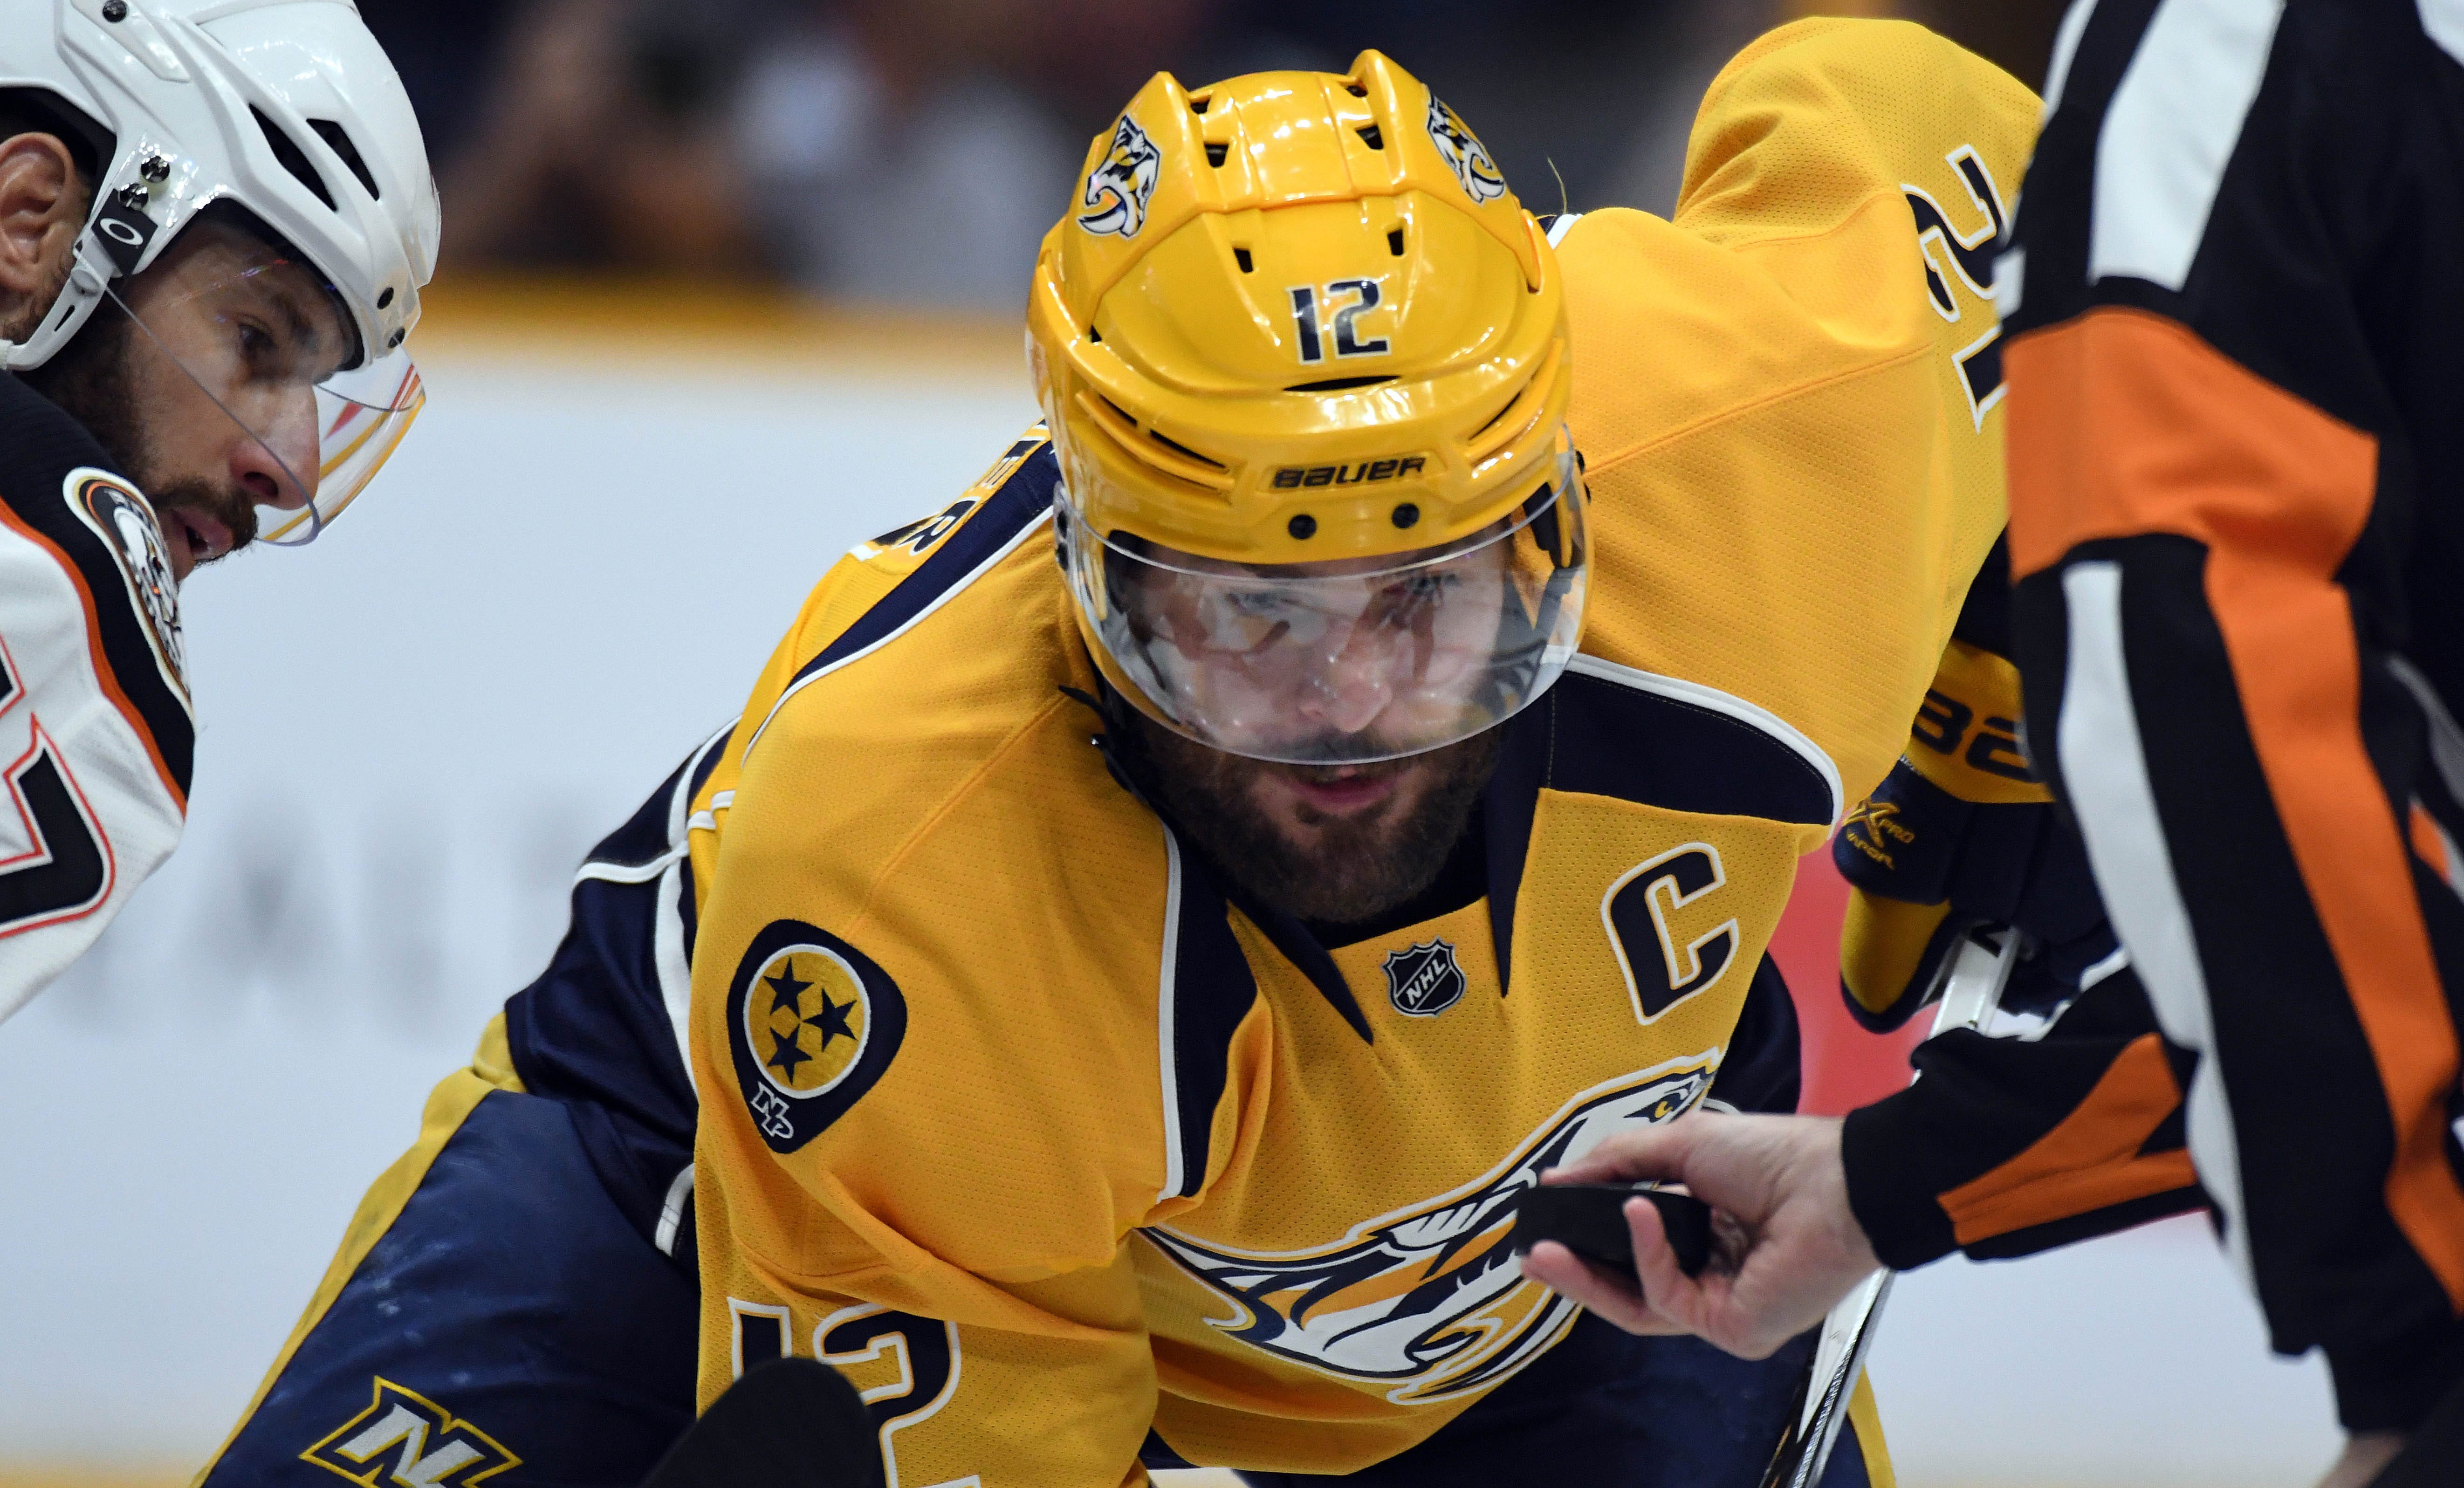 Mike Fisher to be honored at Franklin nonprofit Fundraiser